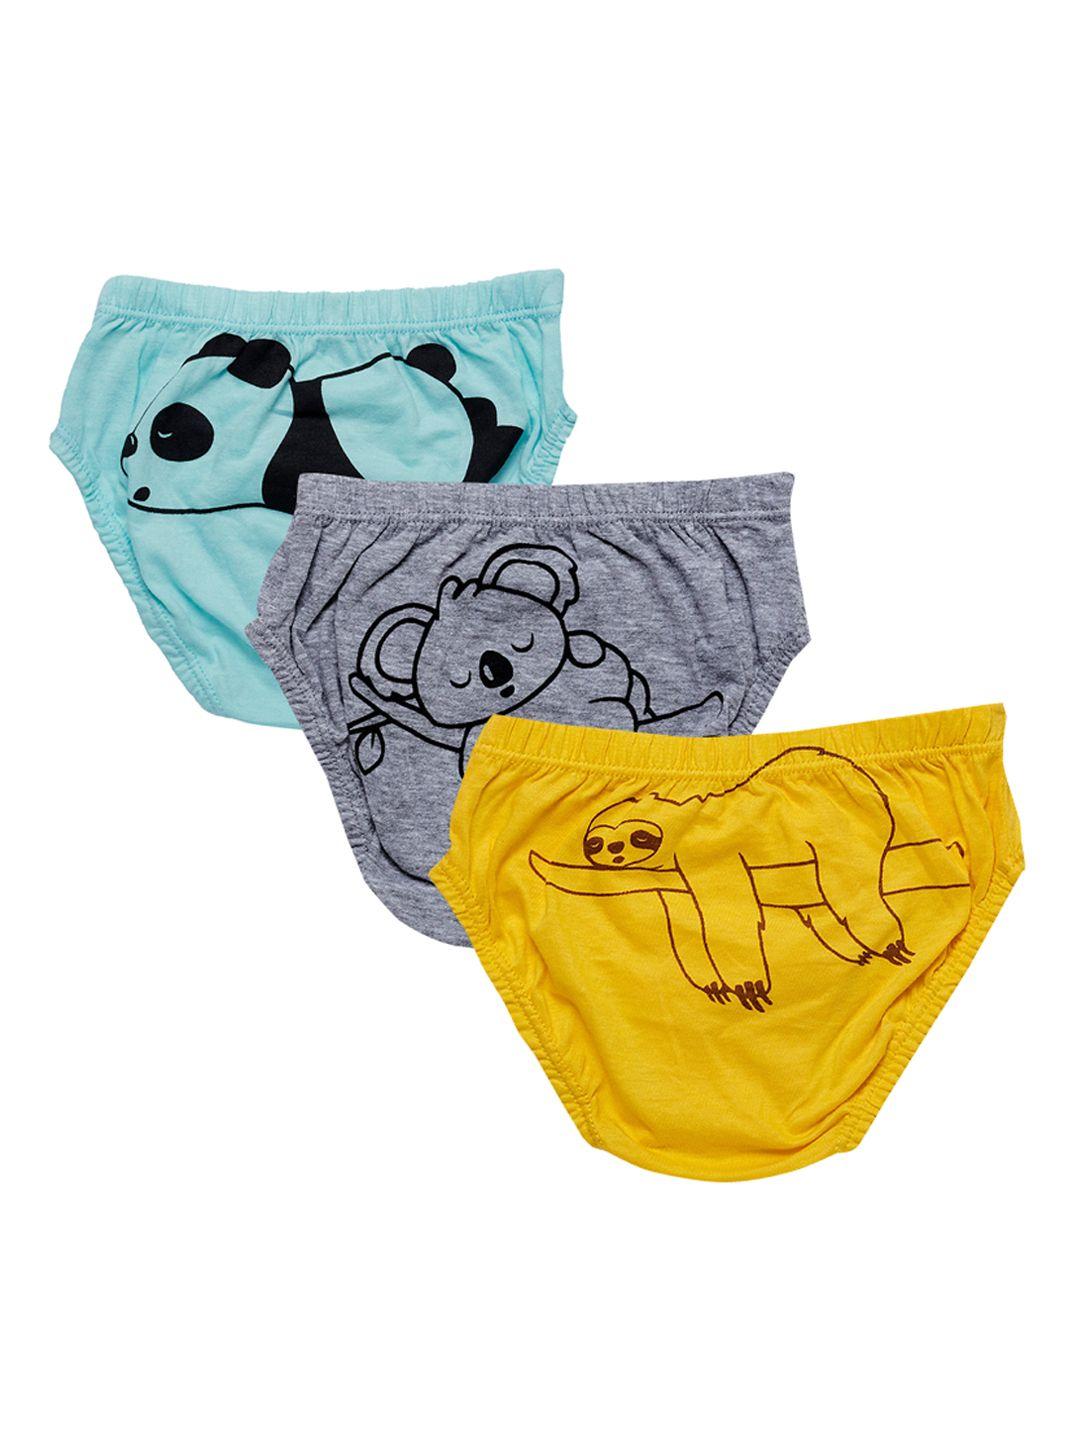 you got plan b boys pack of 3 pure cotton basic briefs